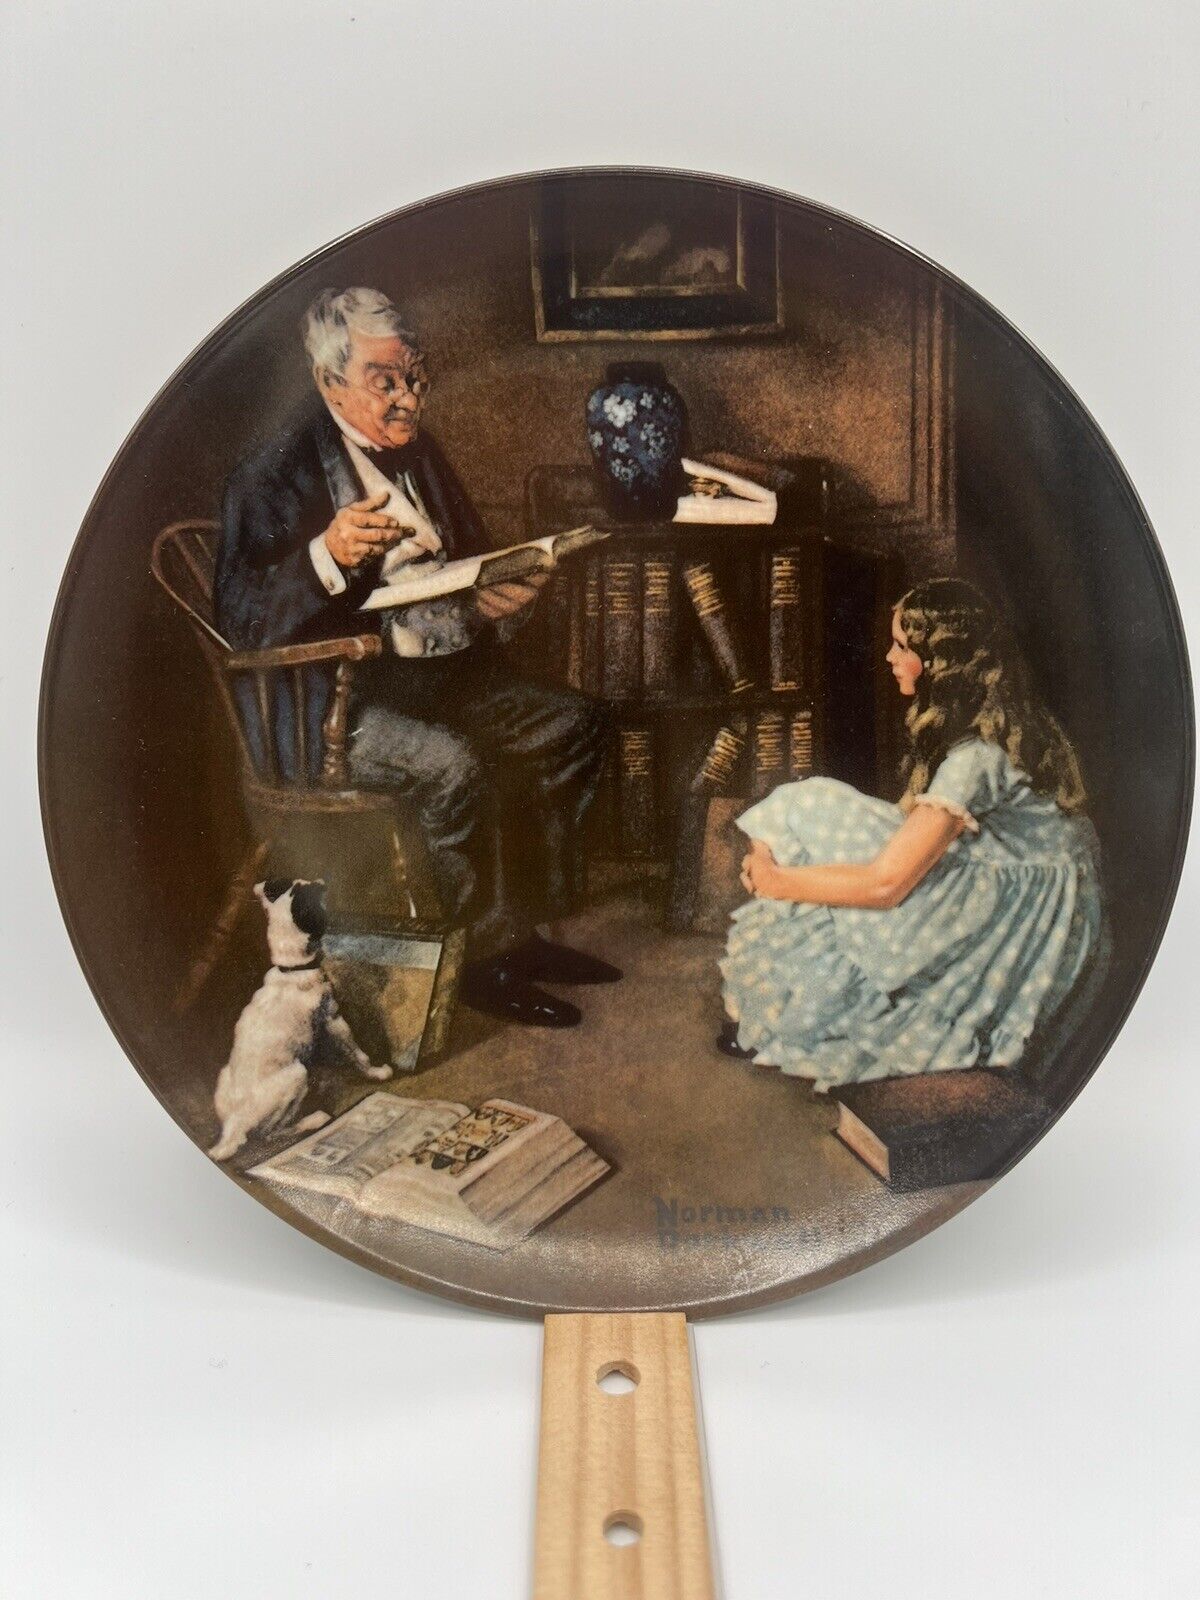 VTG 1984 Knowles NORMAN ROCKWELL Limited Edition Collector Plate THE STORYTELLER